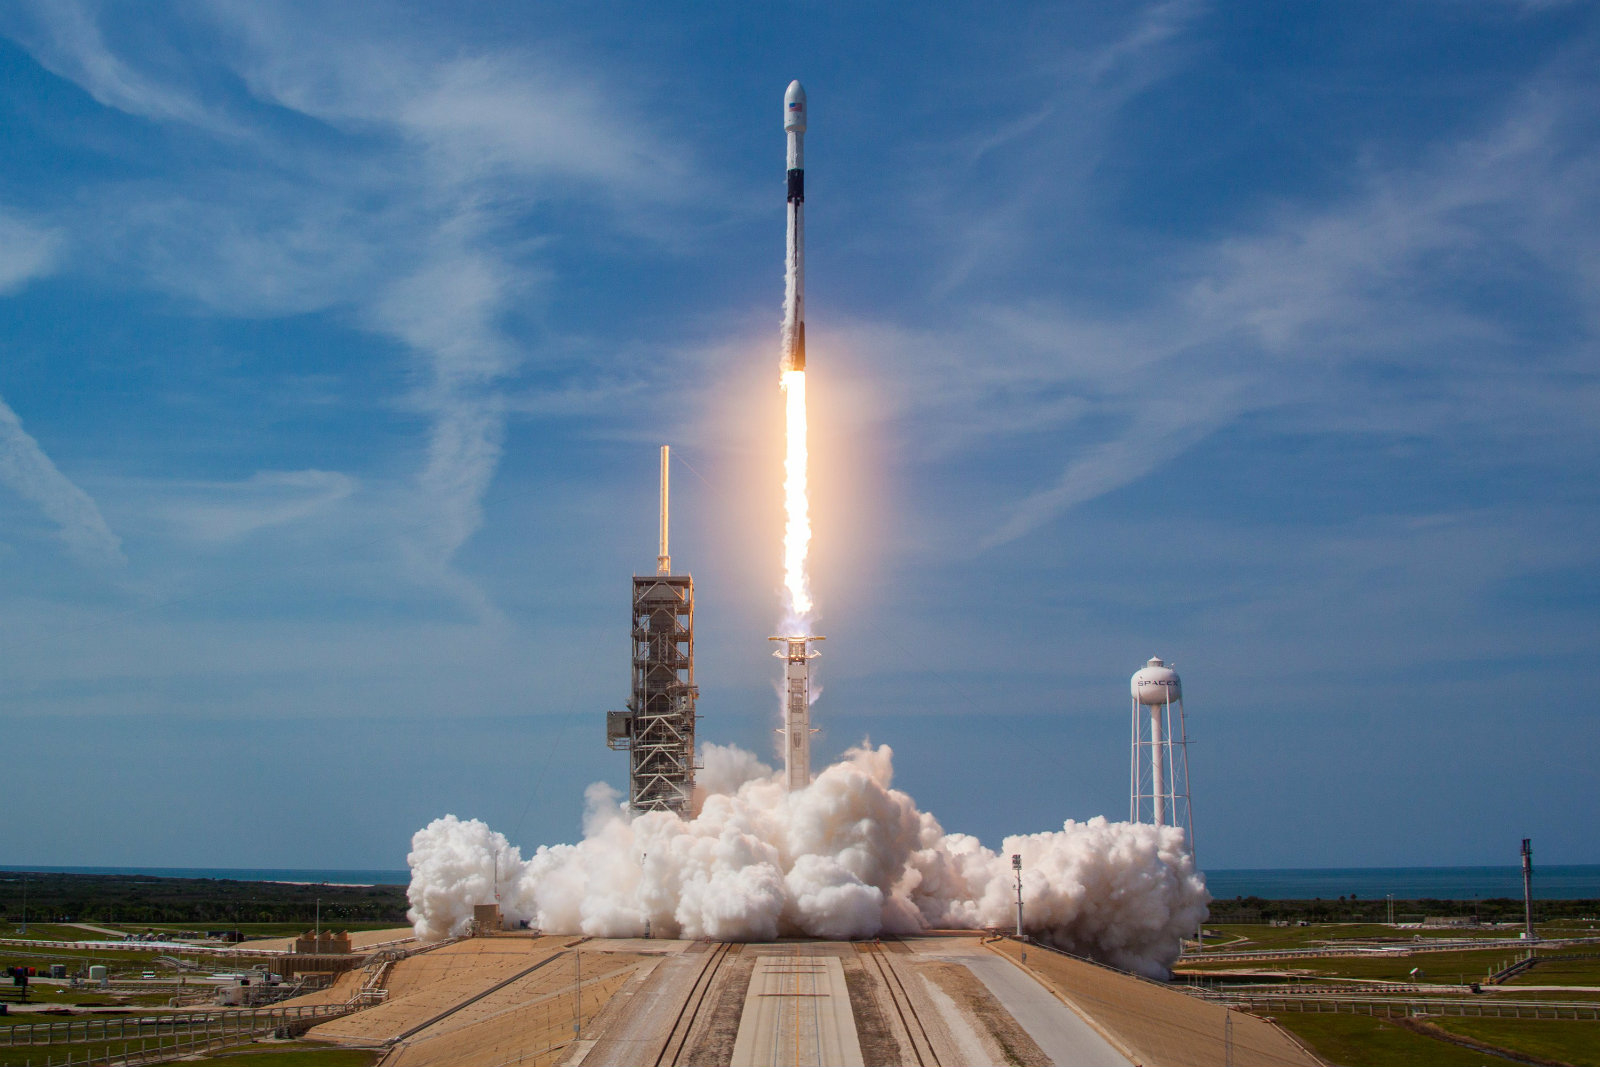 SpaceX’s Falcon 9 rocket heading for milestone third launch DigiTach